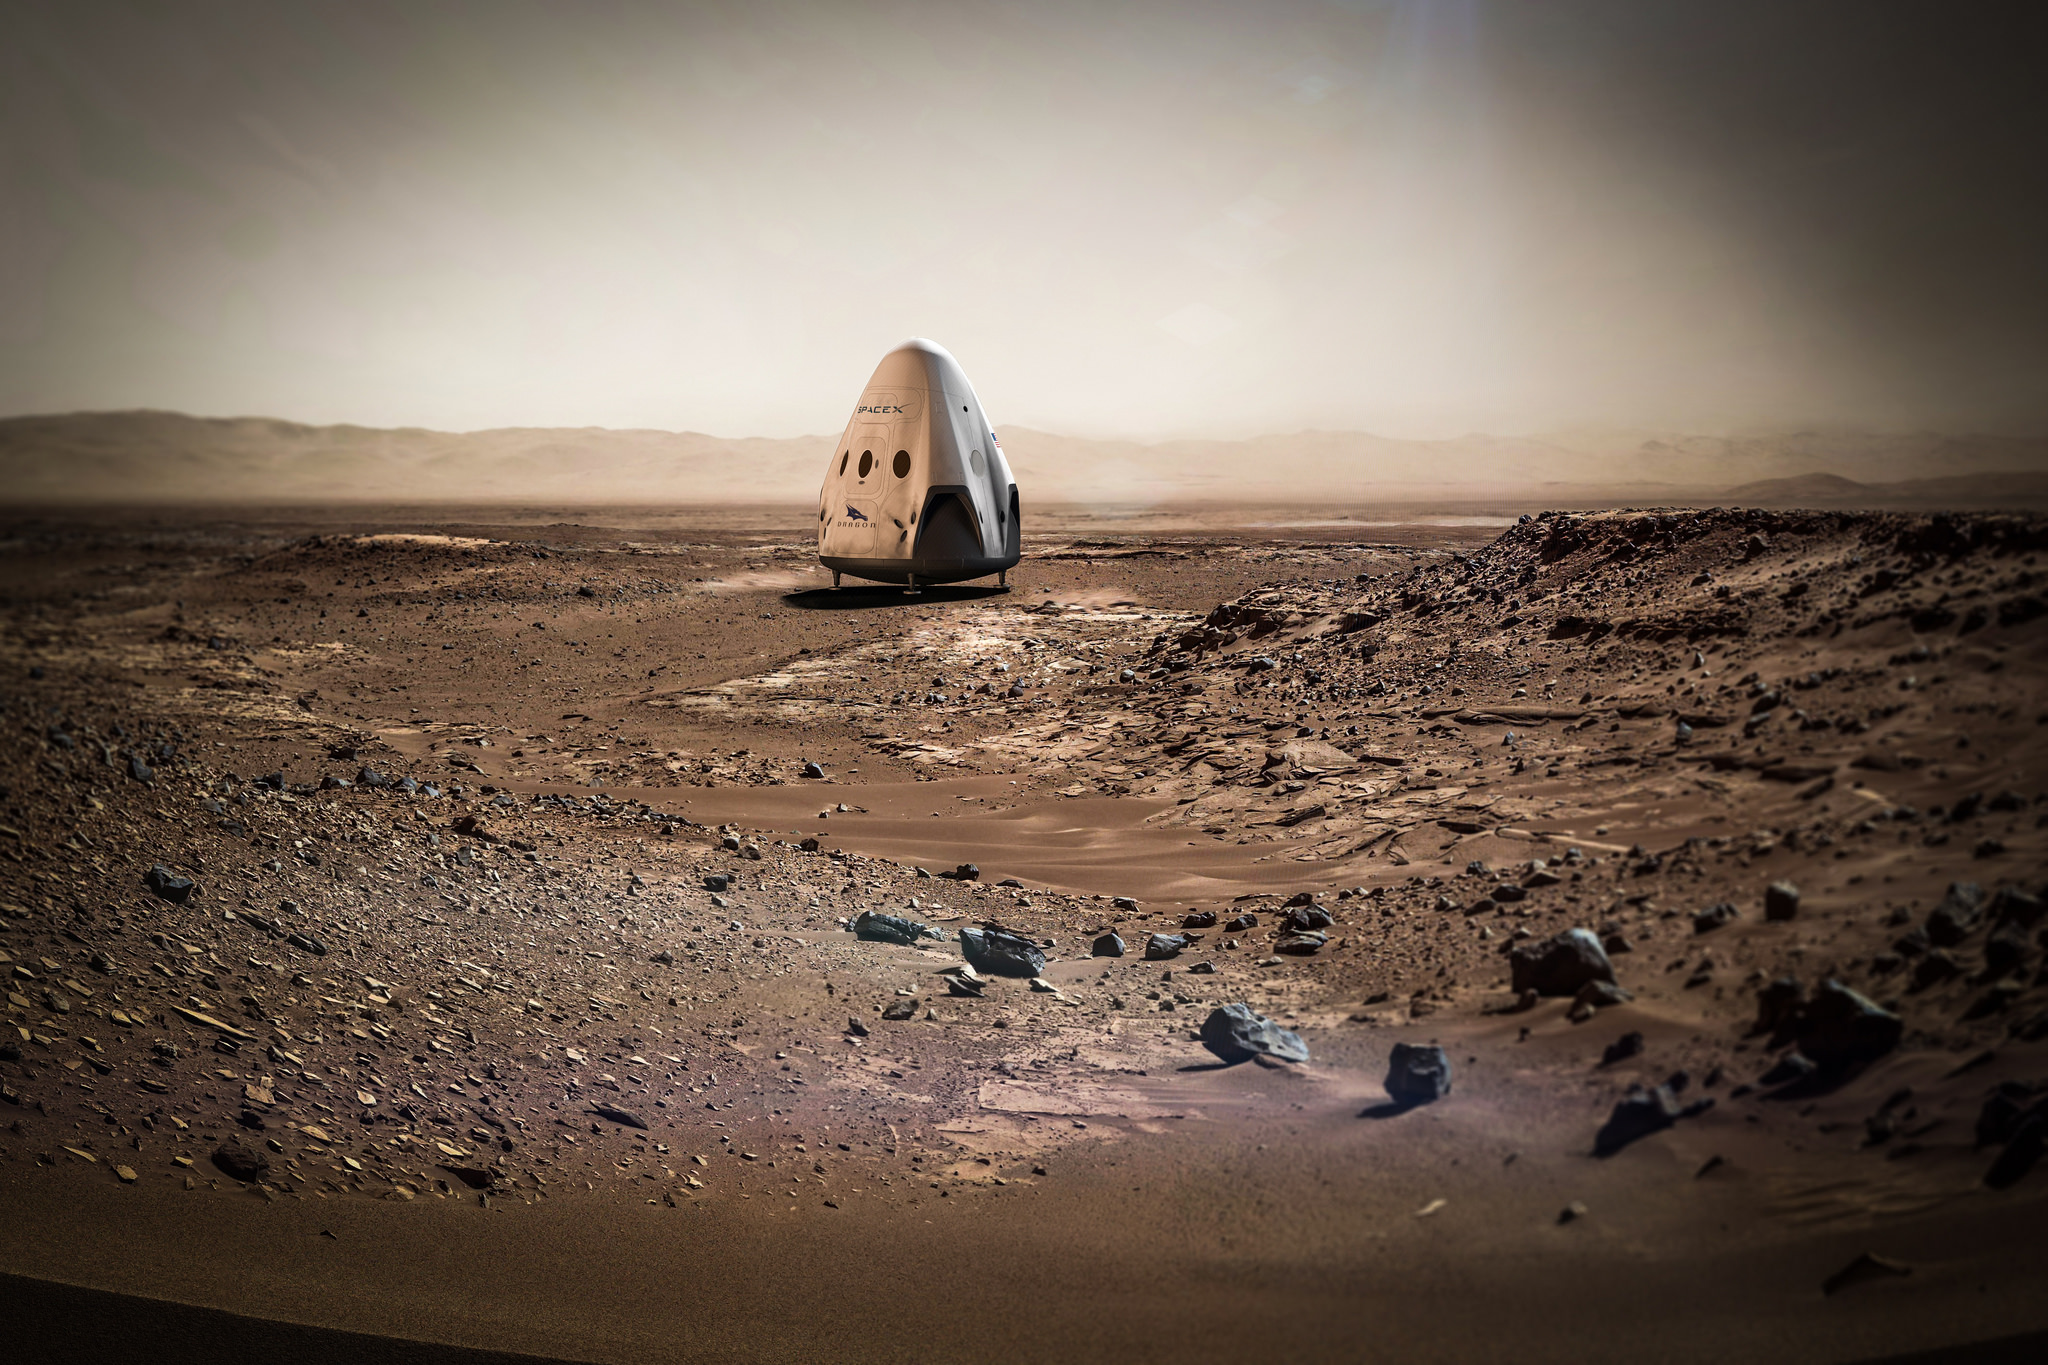 An artist's depiction of the SpaceX Crew Dragon on Mars.